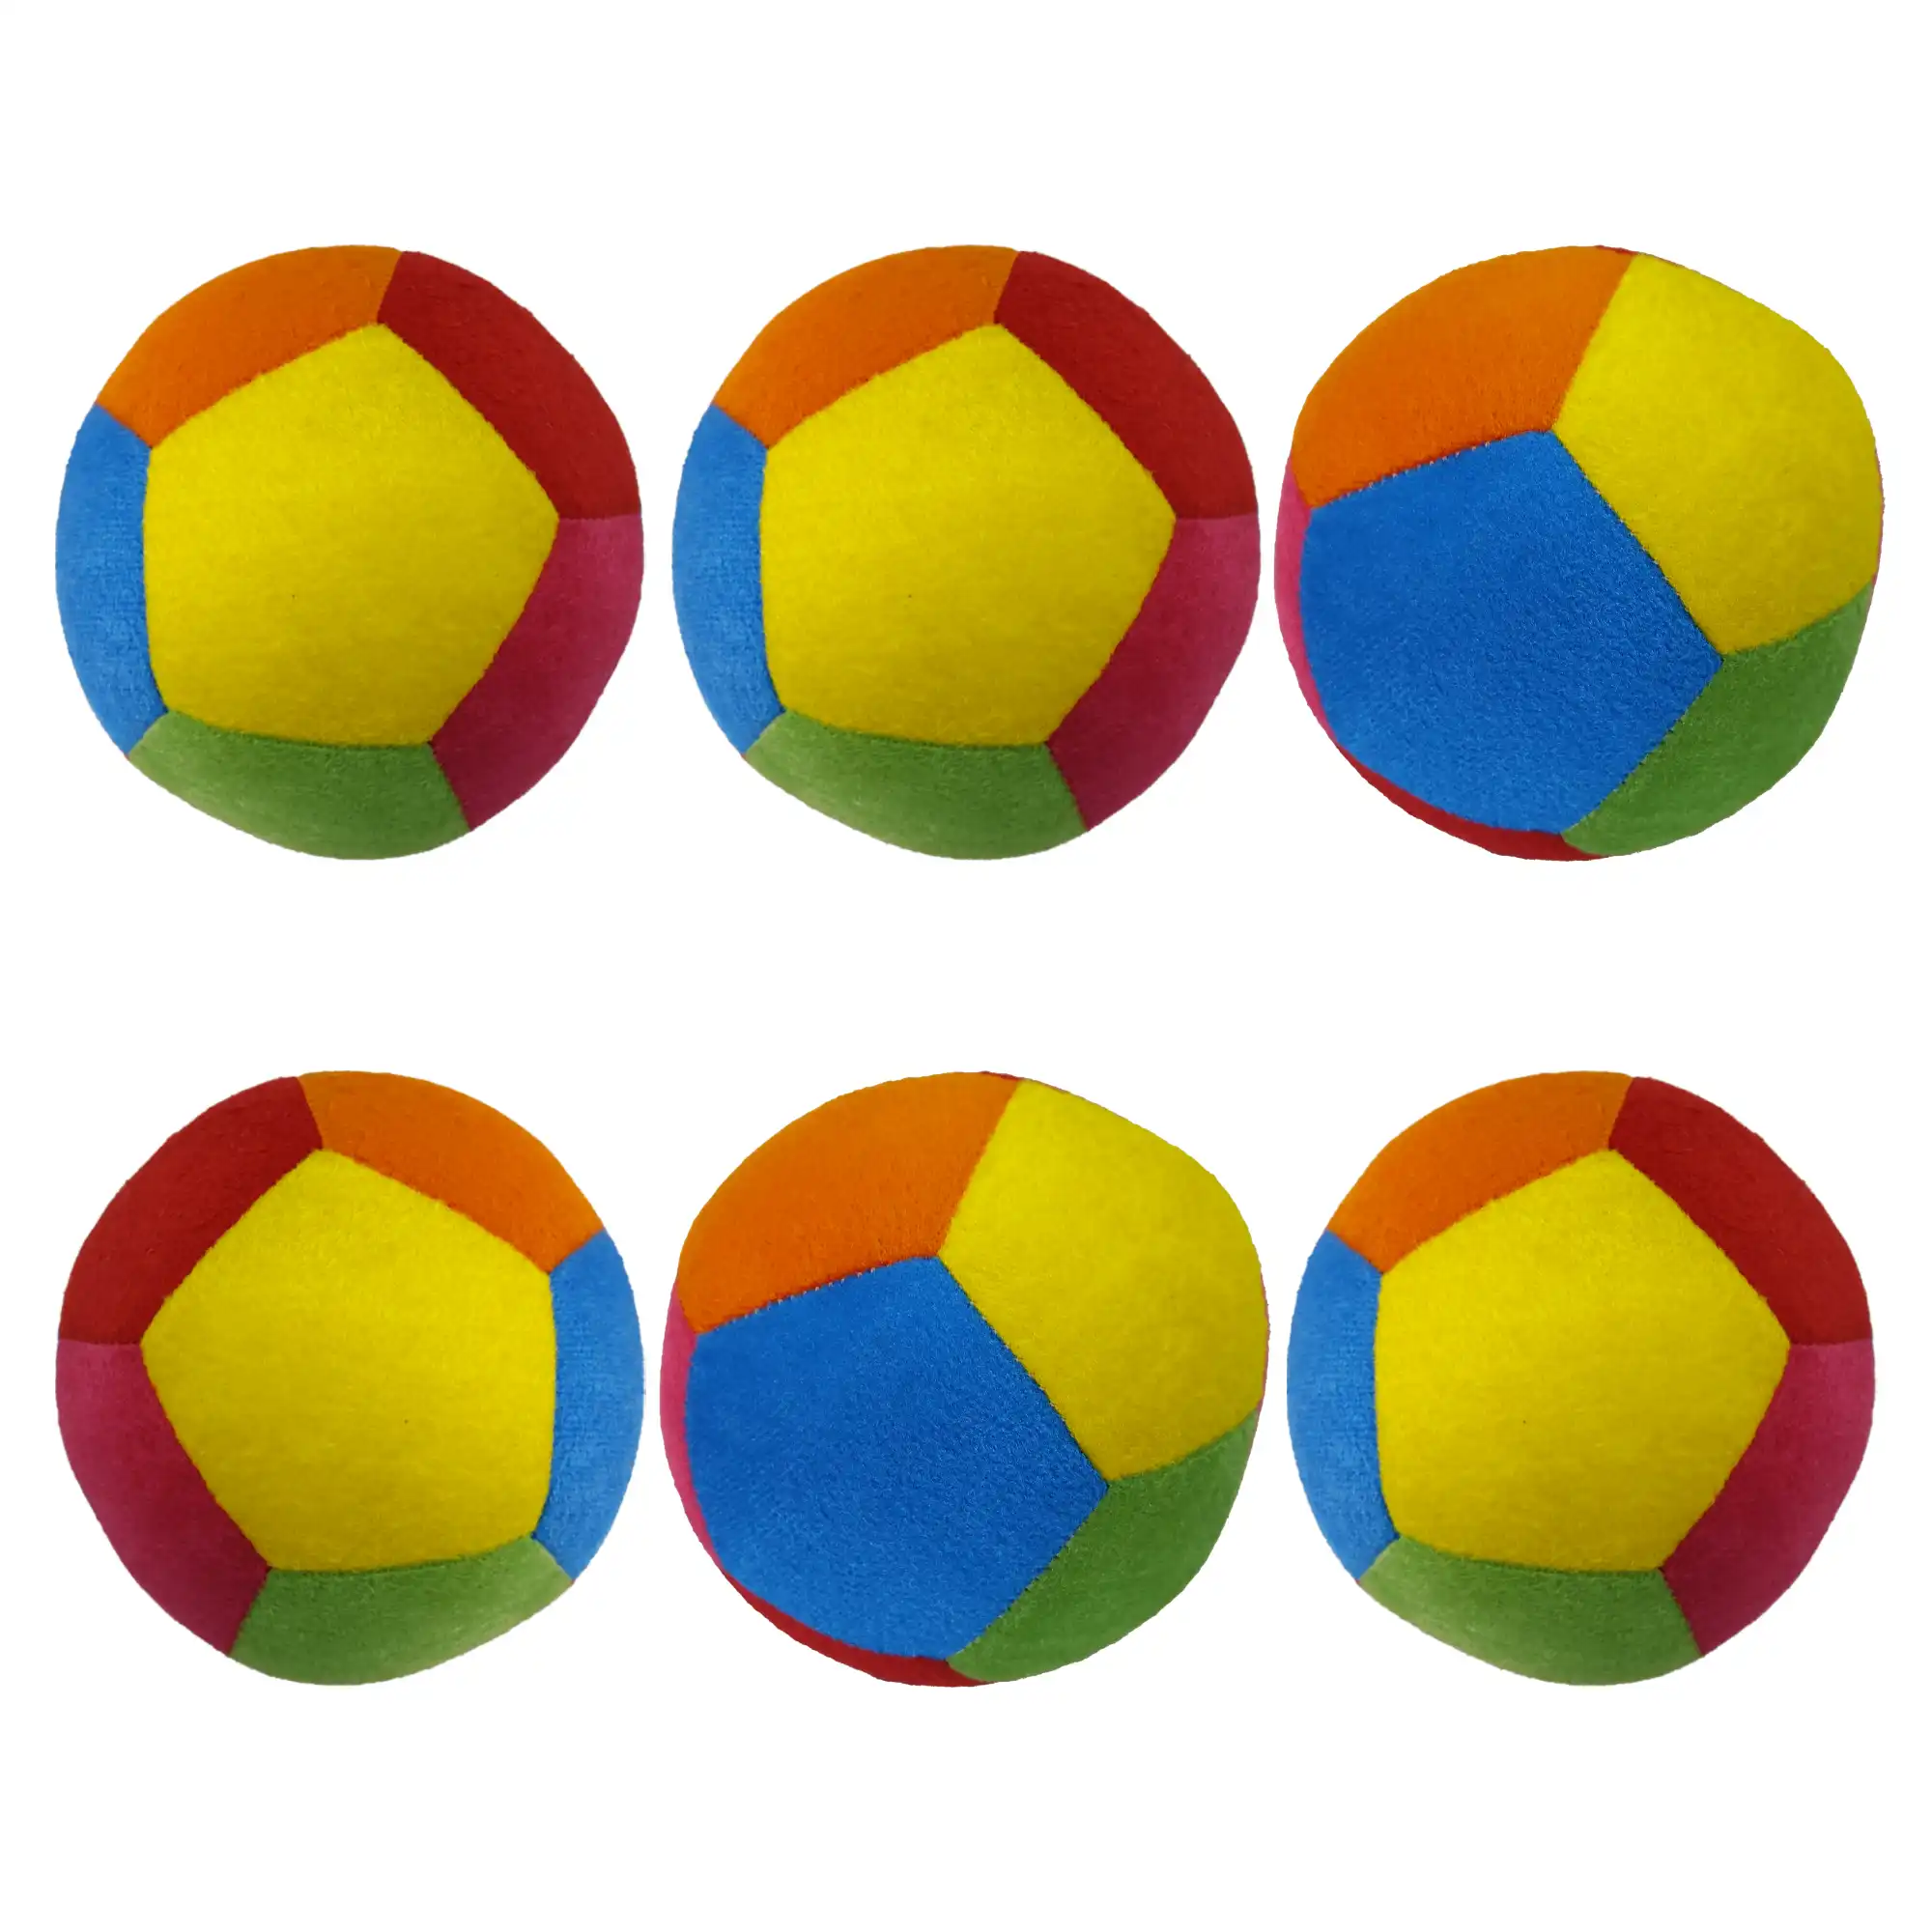 Soft Plush Ball For Kids With Rattle Sound 6